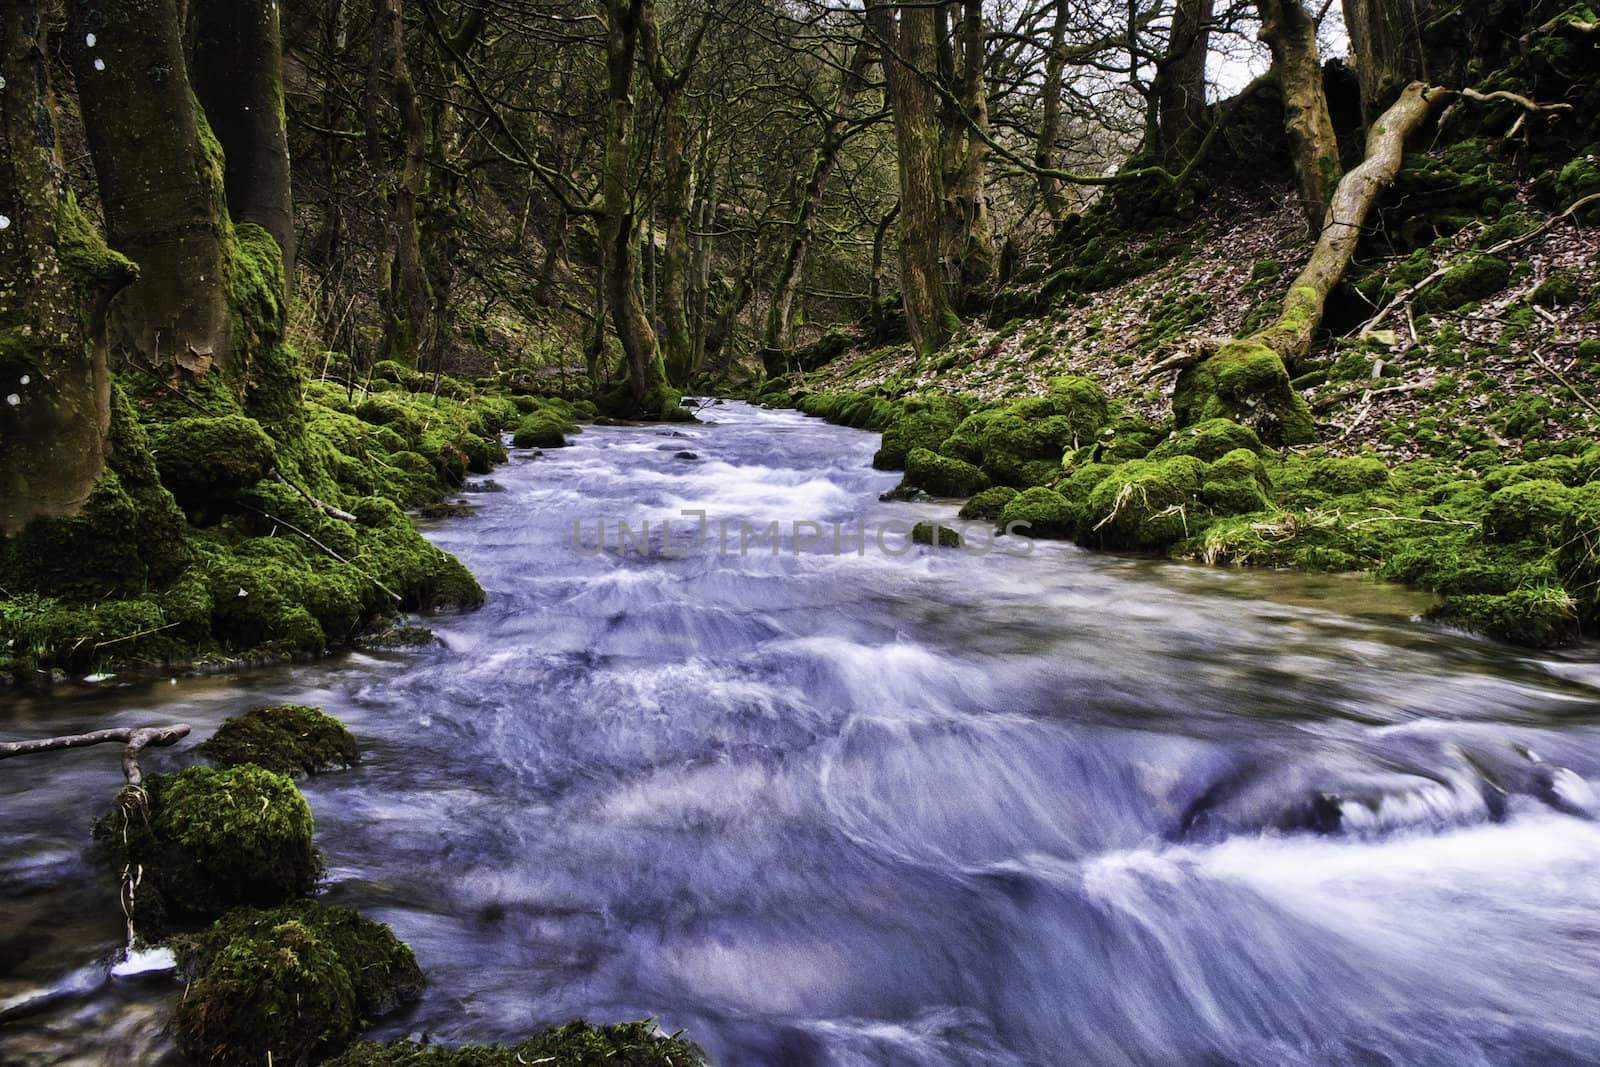 Long exposure with silky water of a stream or small river flowing through mossy woodland with forest trees